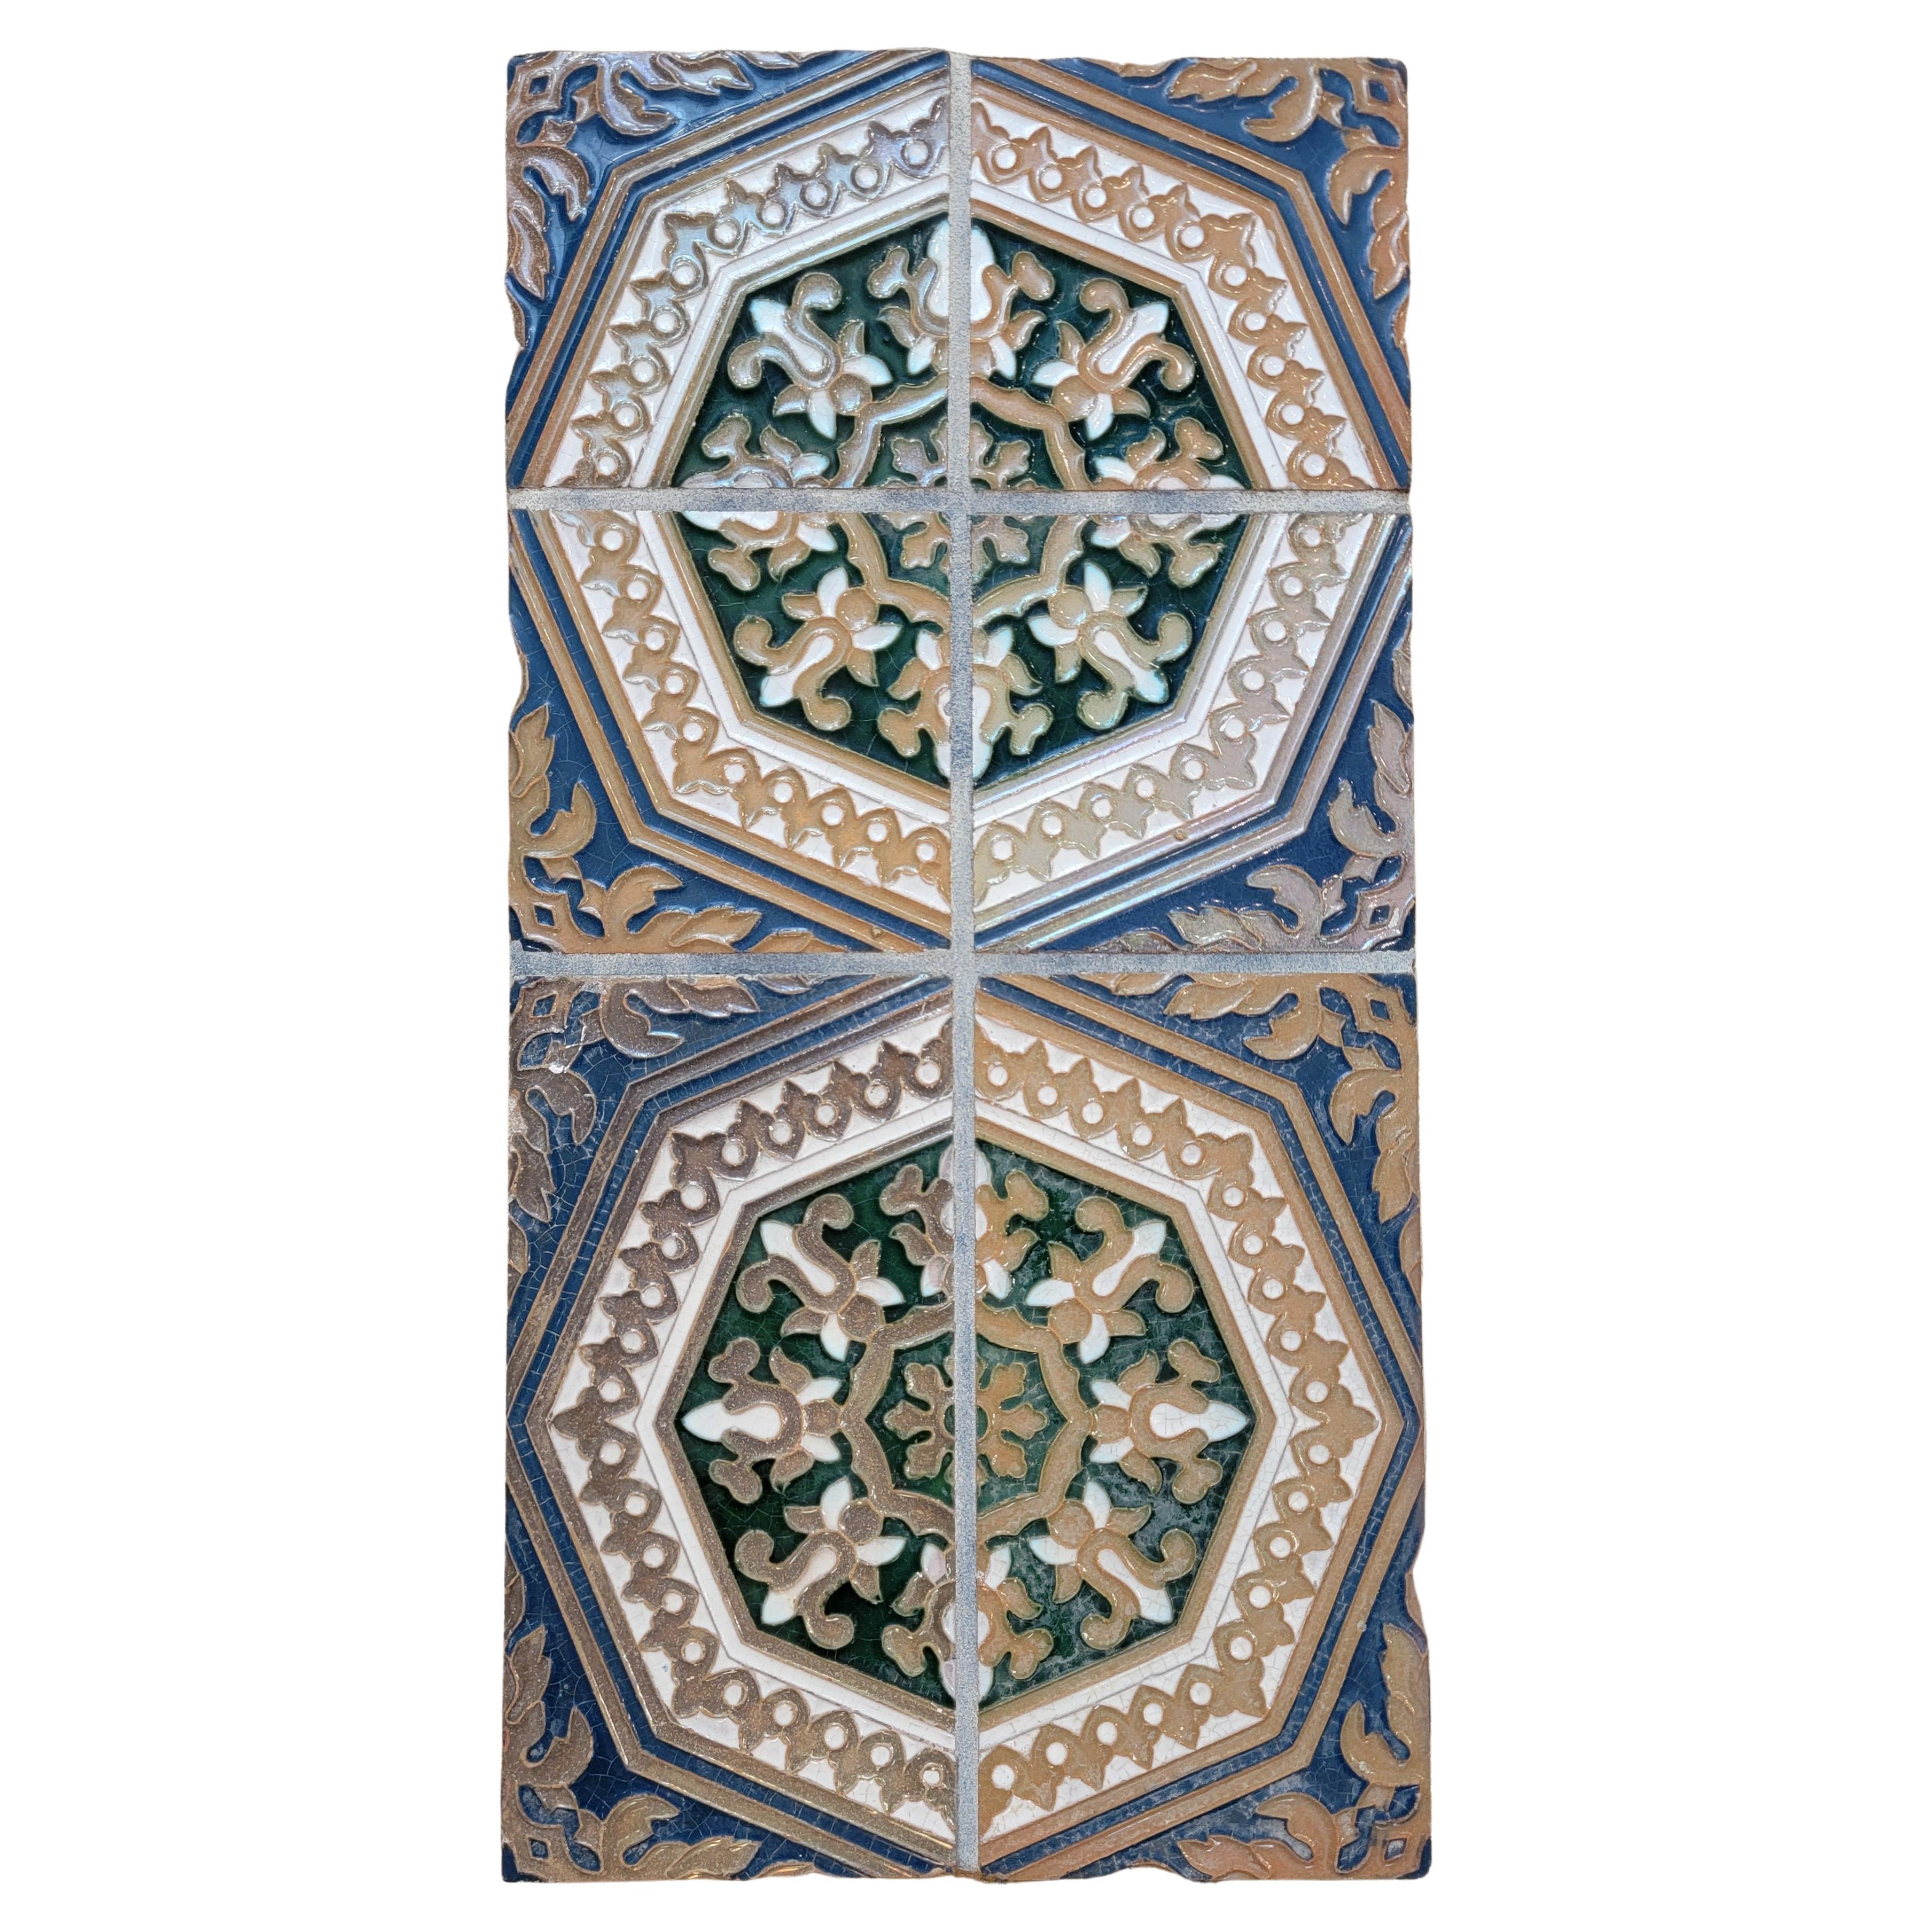 Octagonal Blue and Beige Tile Wall art or Table Top For Sale